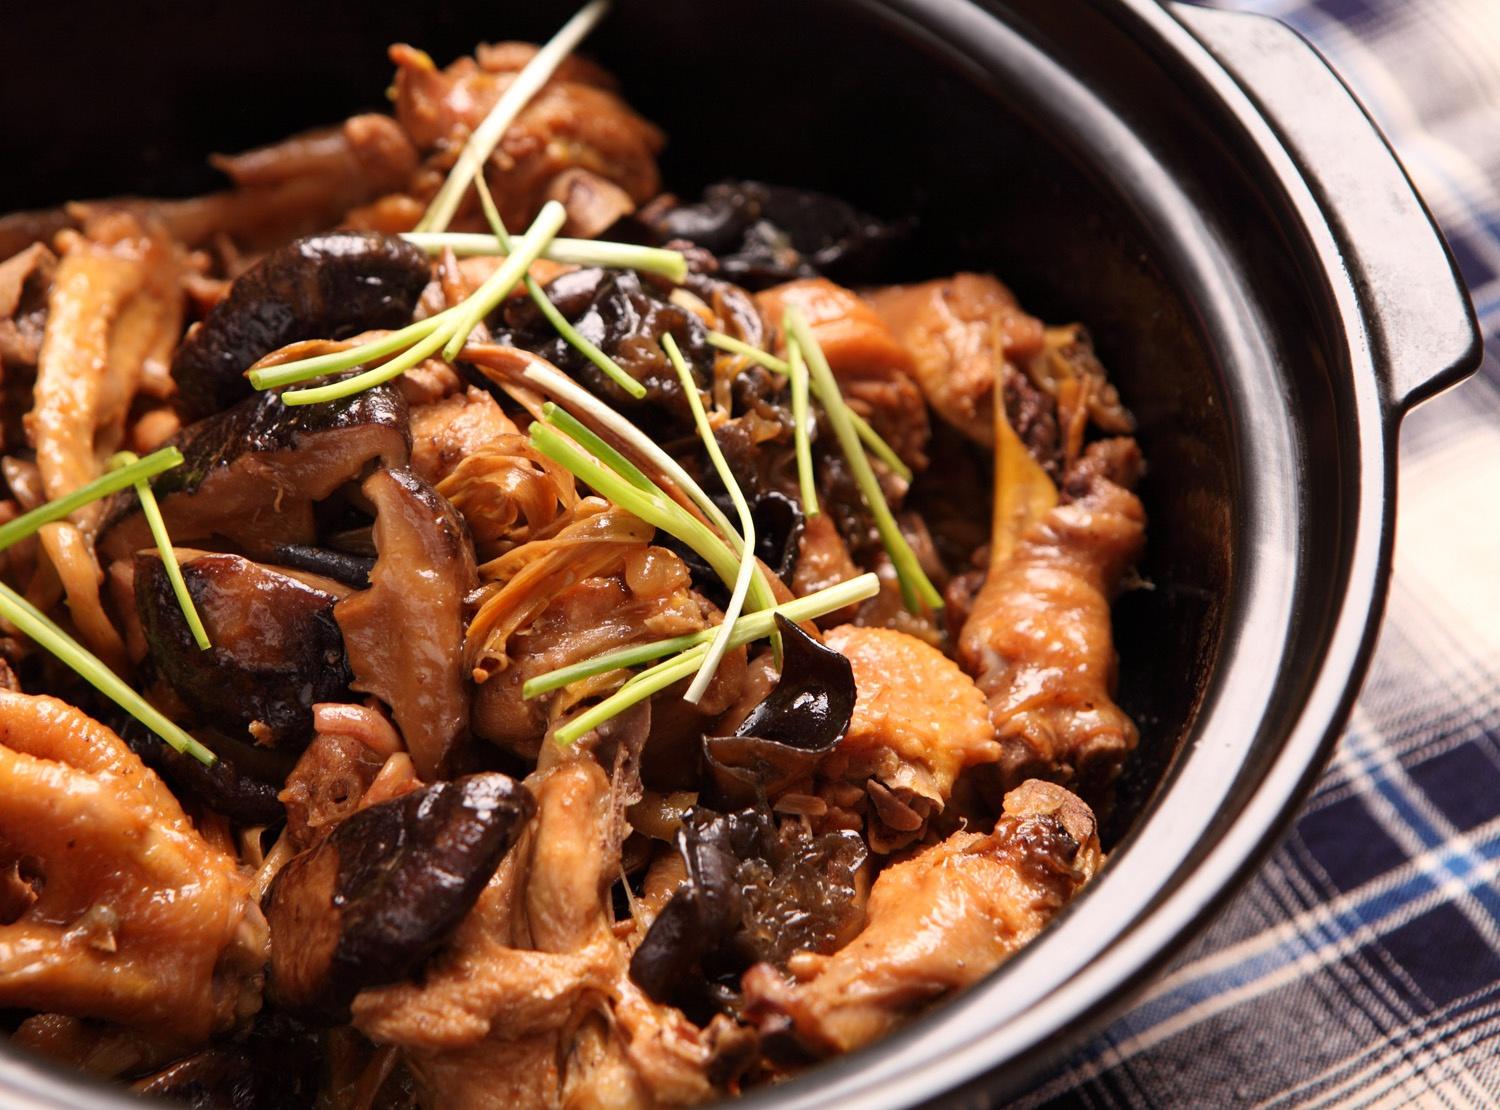 
The practice of chicken of stew of authentic dried mushrooms, how is the most authentic practice solution _ done delicious